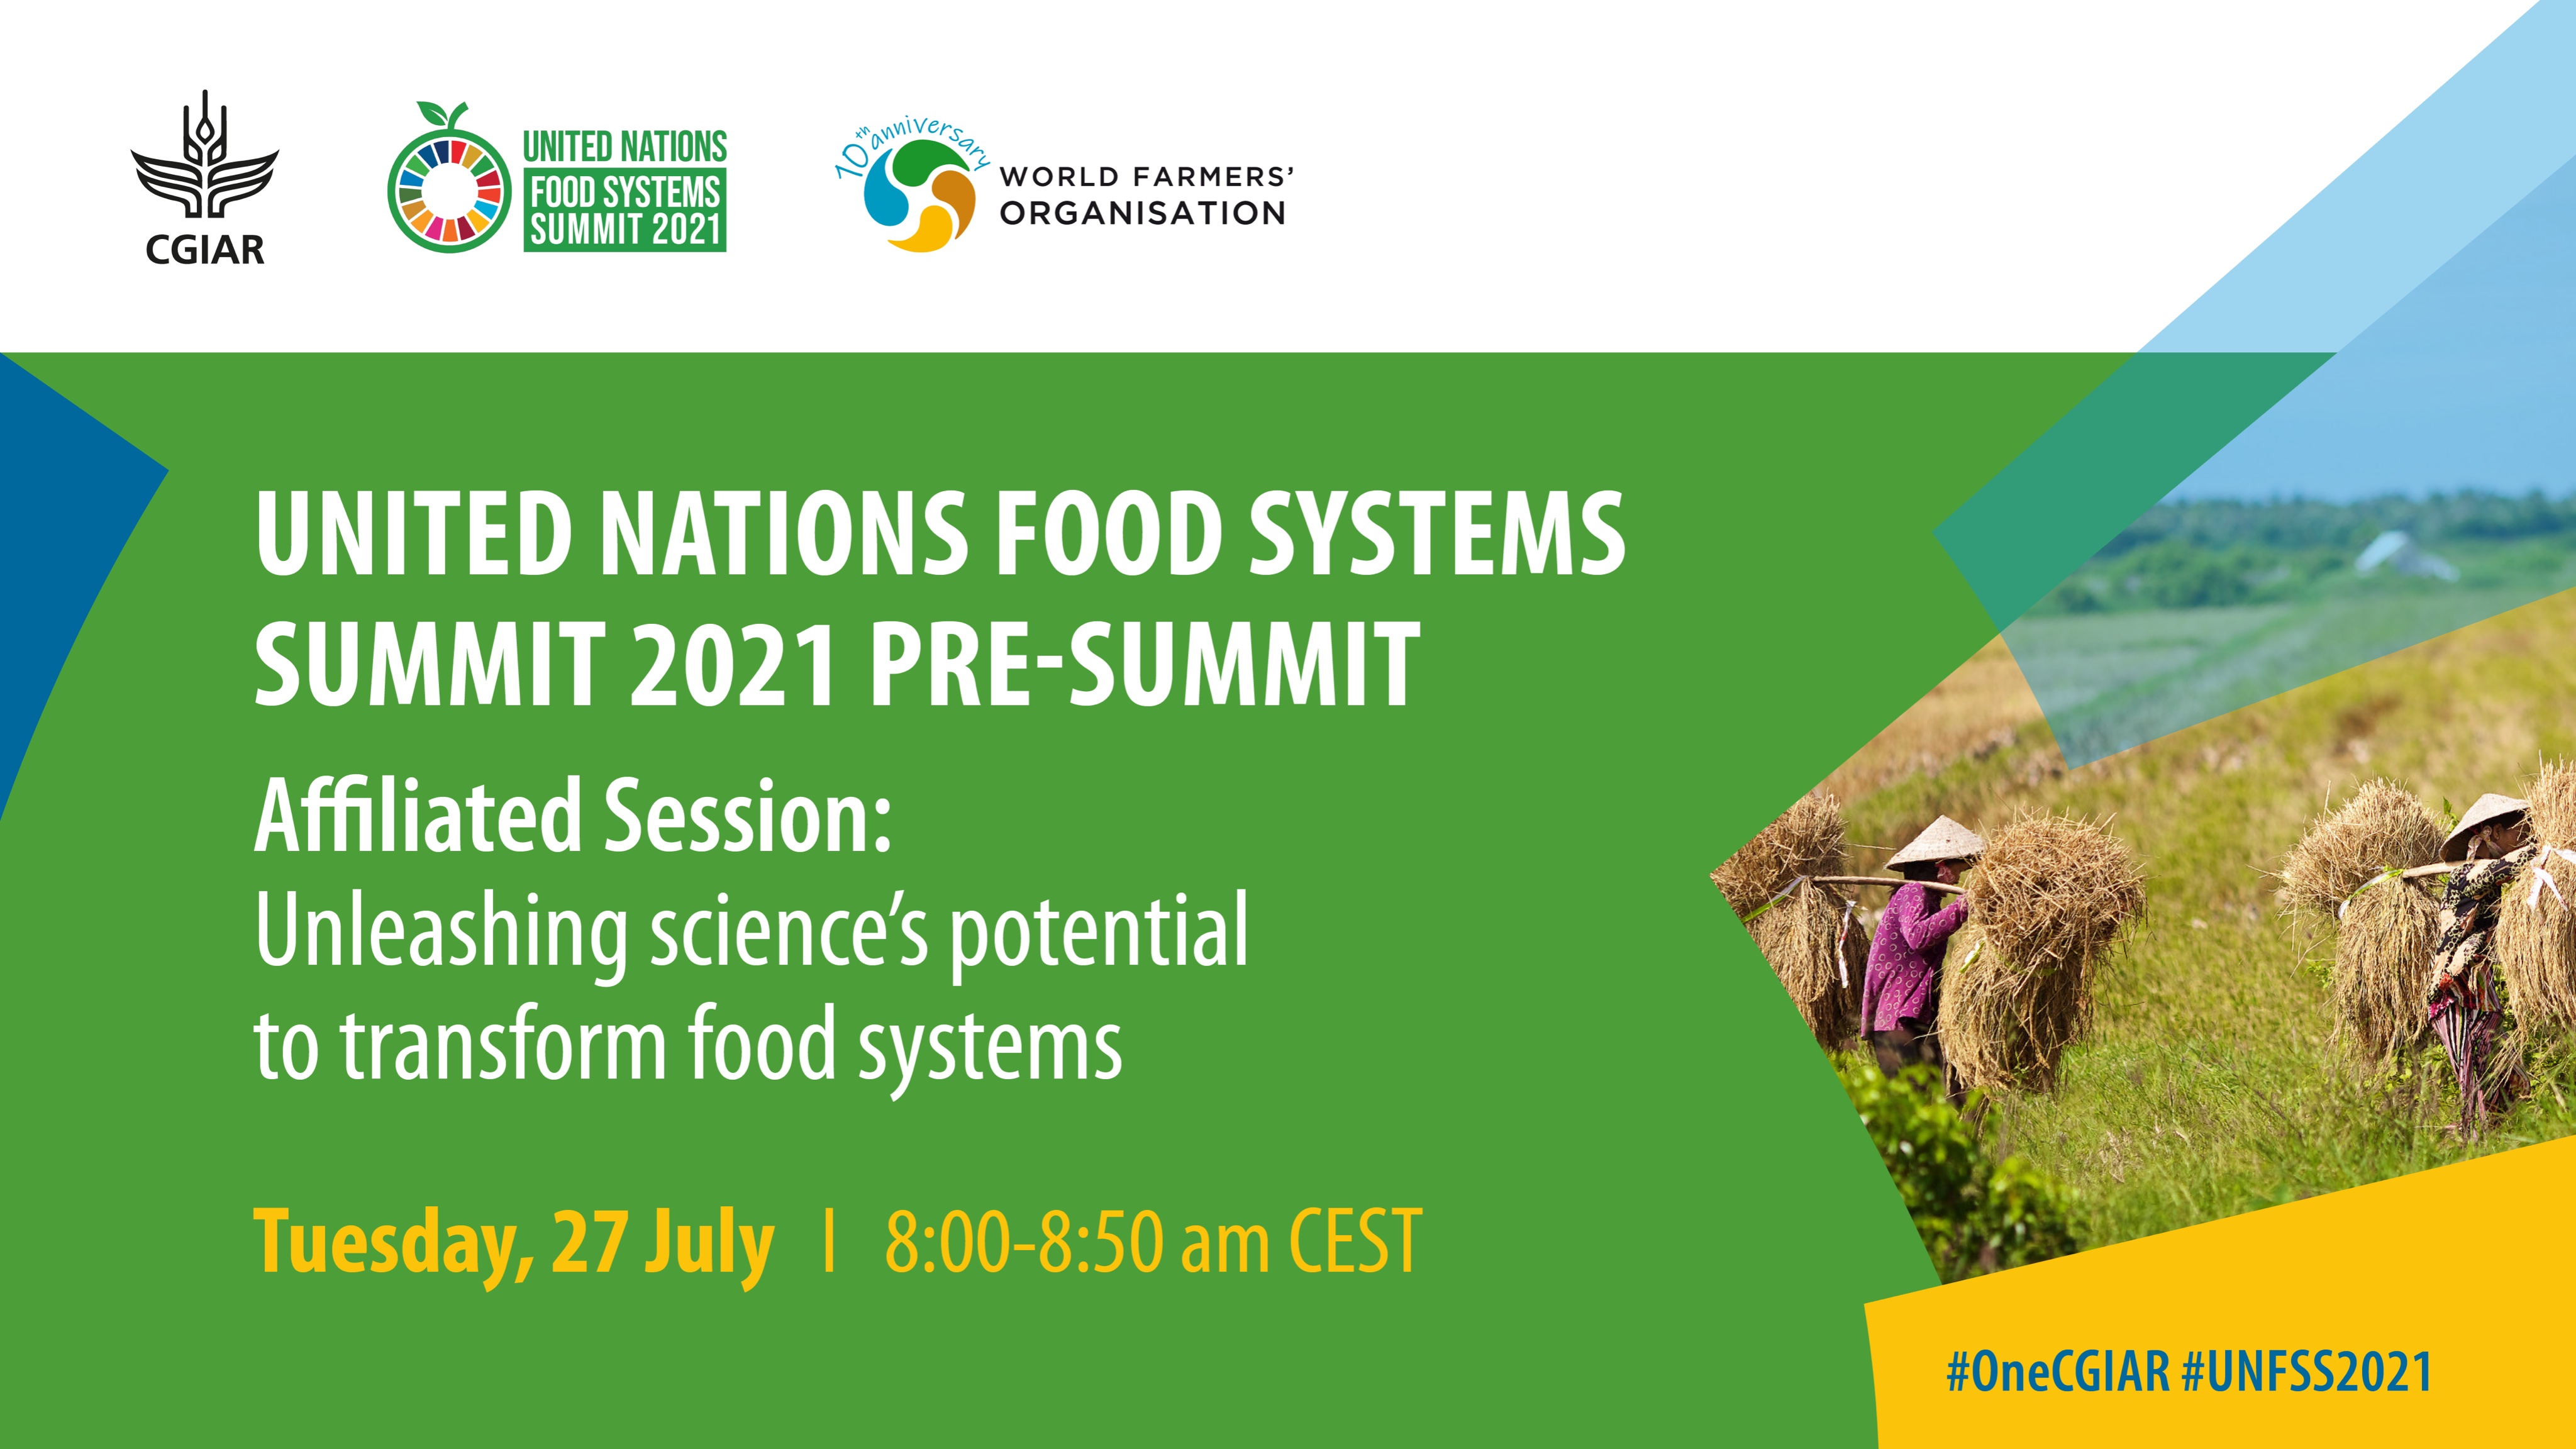 Unleashing science’s potential to transform food systems